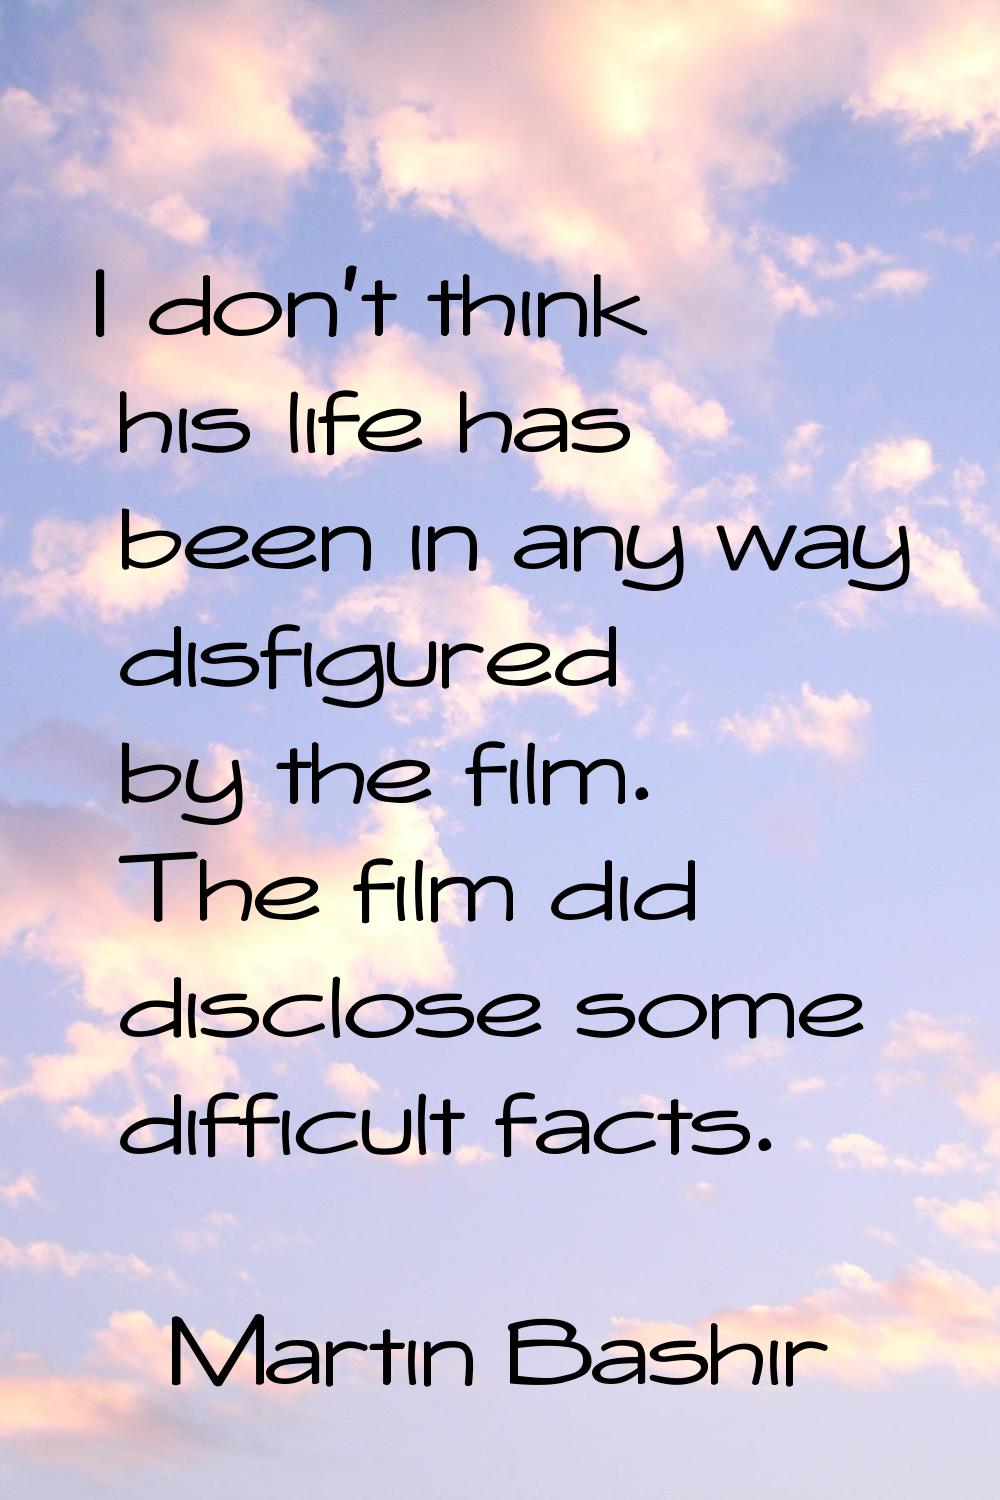 I don't think his life has been in any way disfigured by the film. The film did disclose some diffi